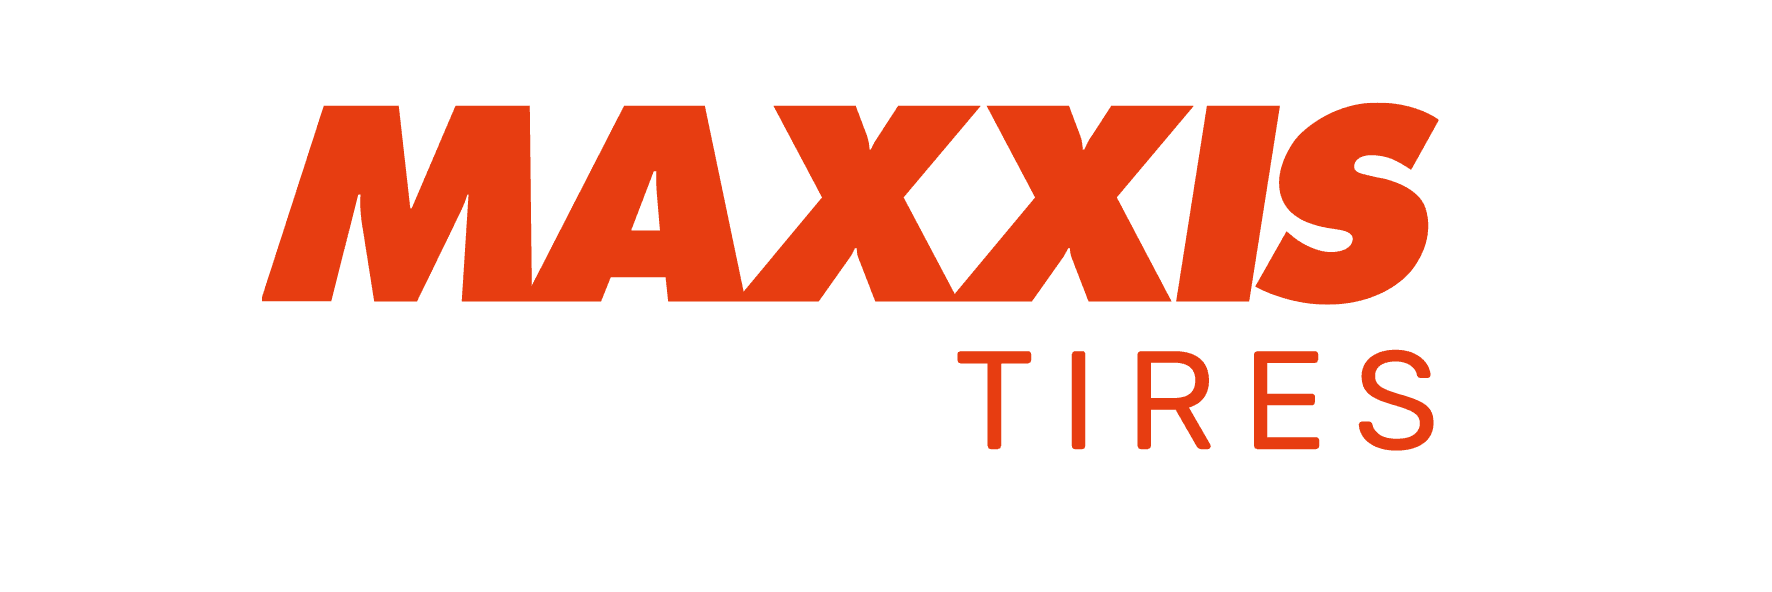 MAXXIS TIRES (10)